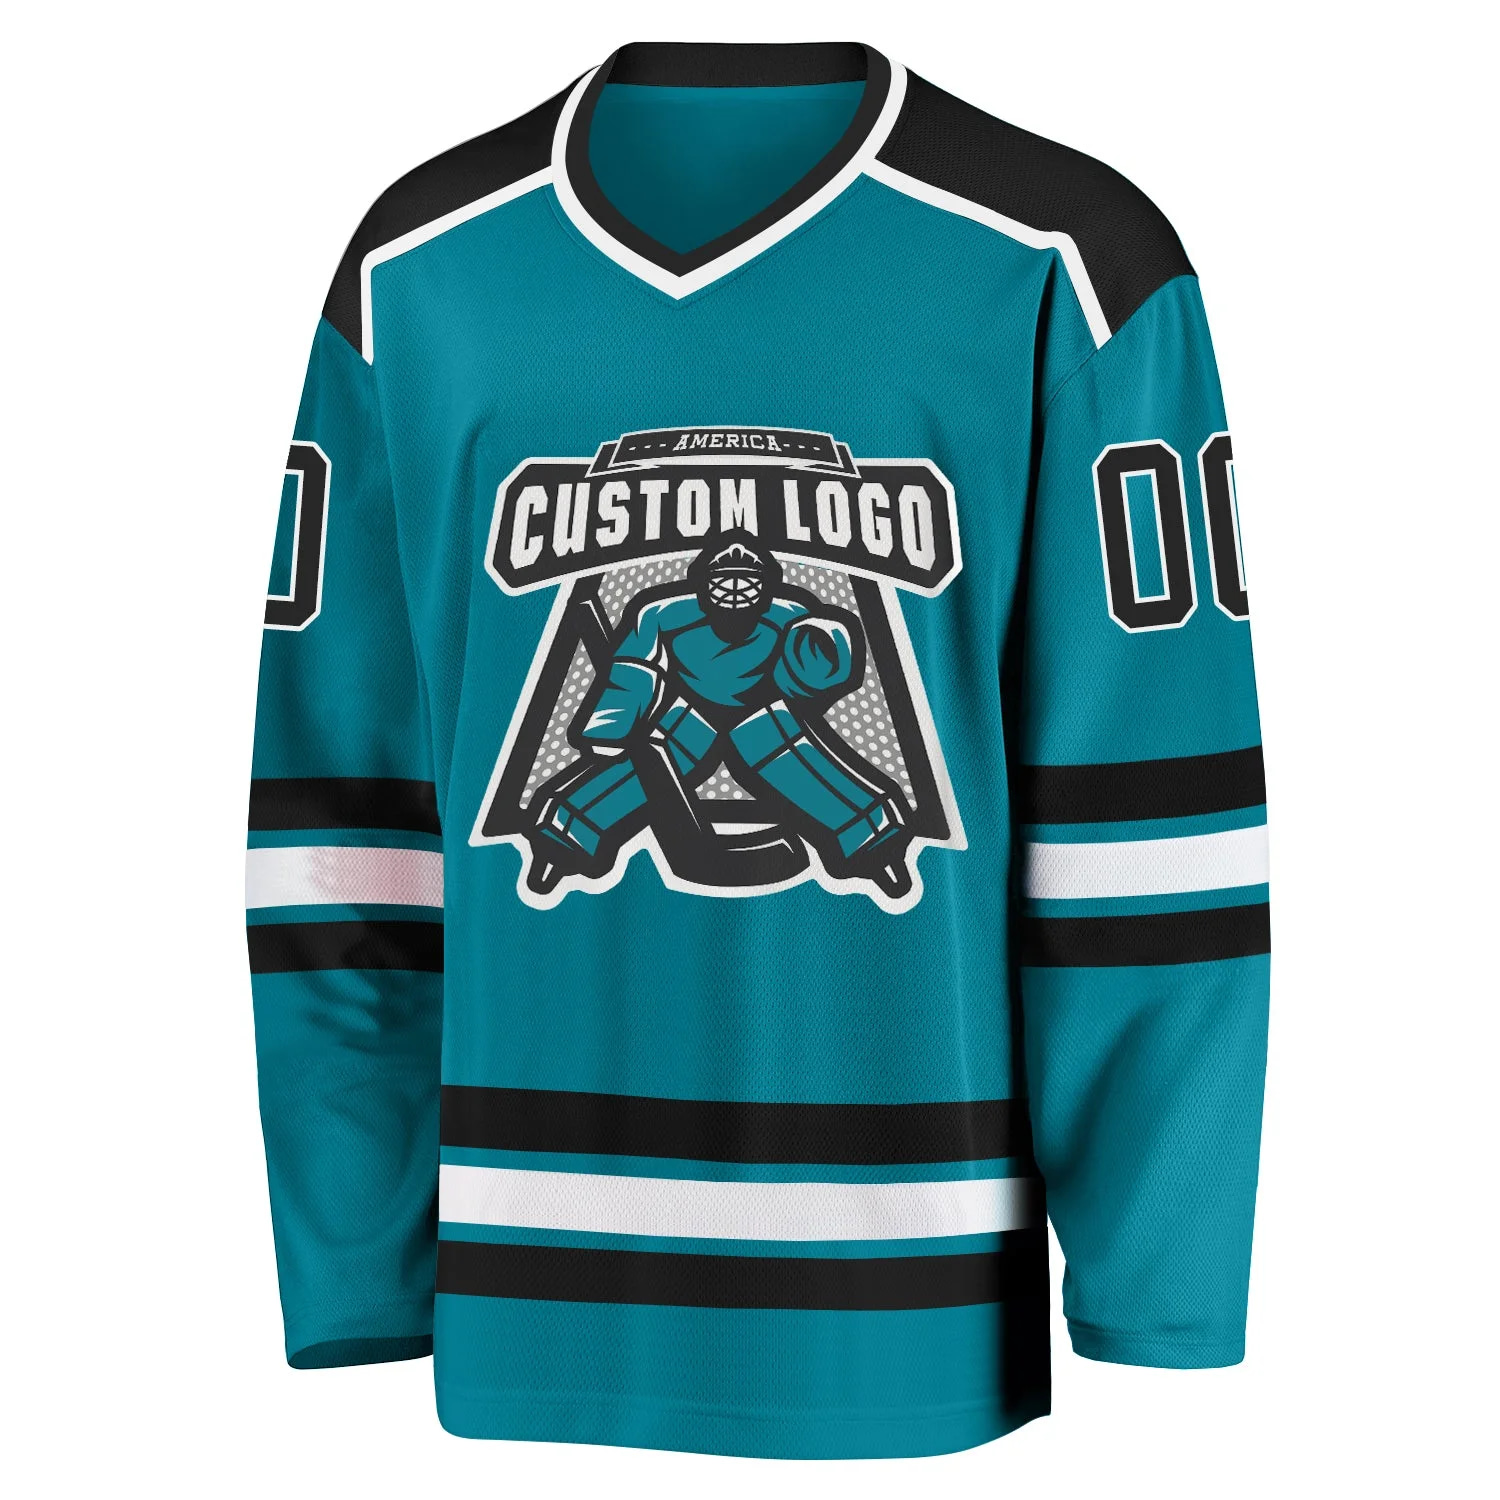 Inktee Store - Stitched And Print Teal Black-White Hockey Jersey Custom Image